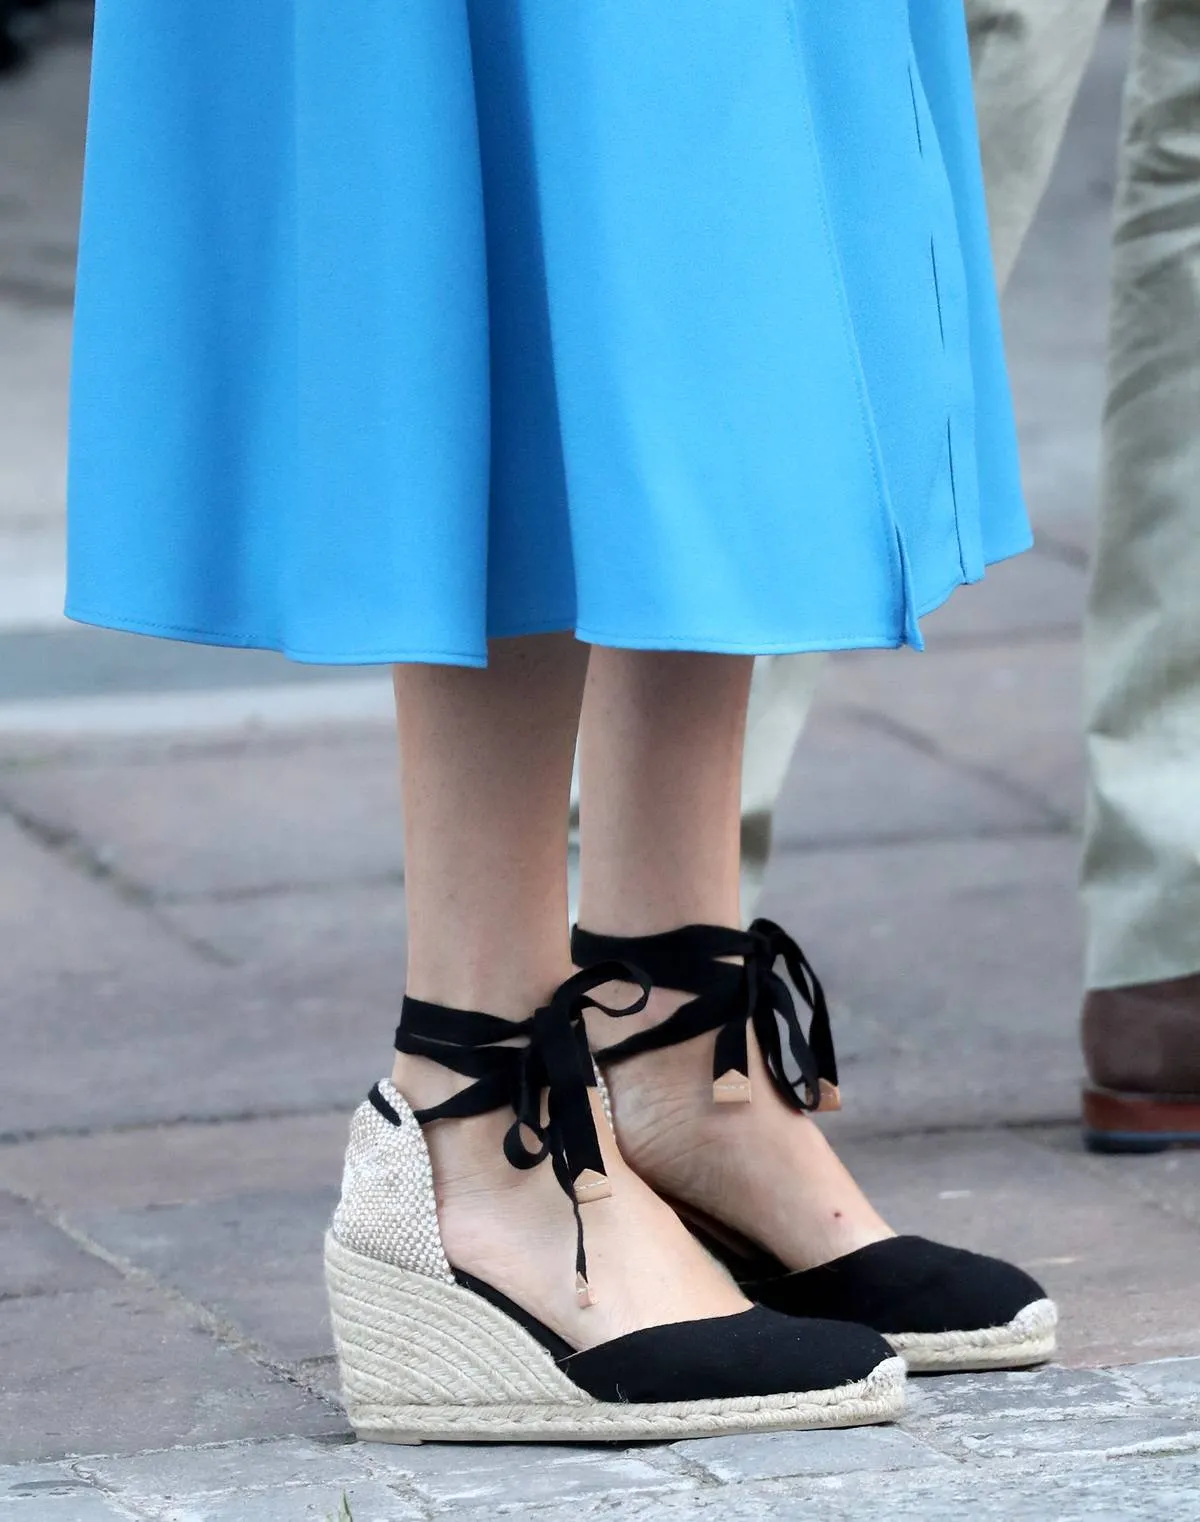 A close-up shows Meghan Markle's pumps during her visit to the District 6 Museum in South Africa, 2019.